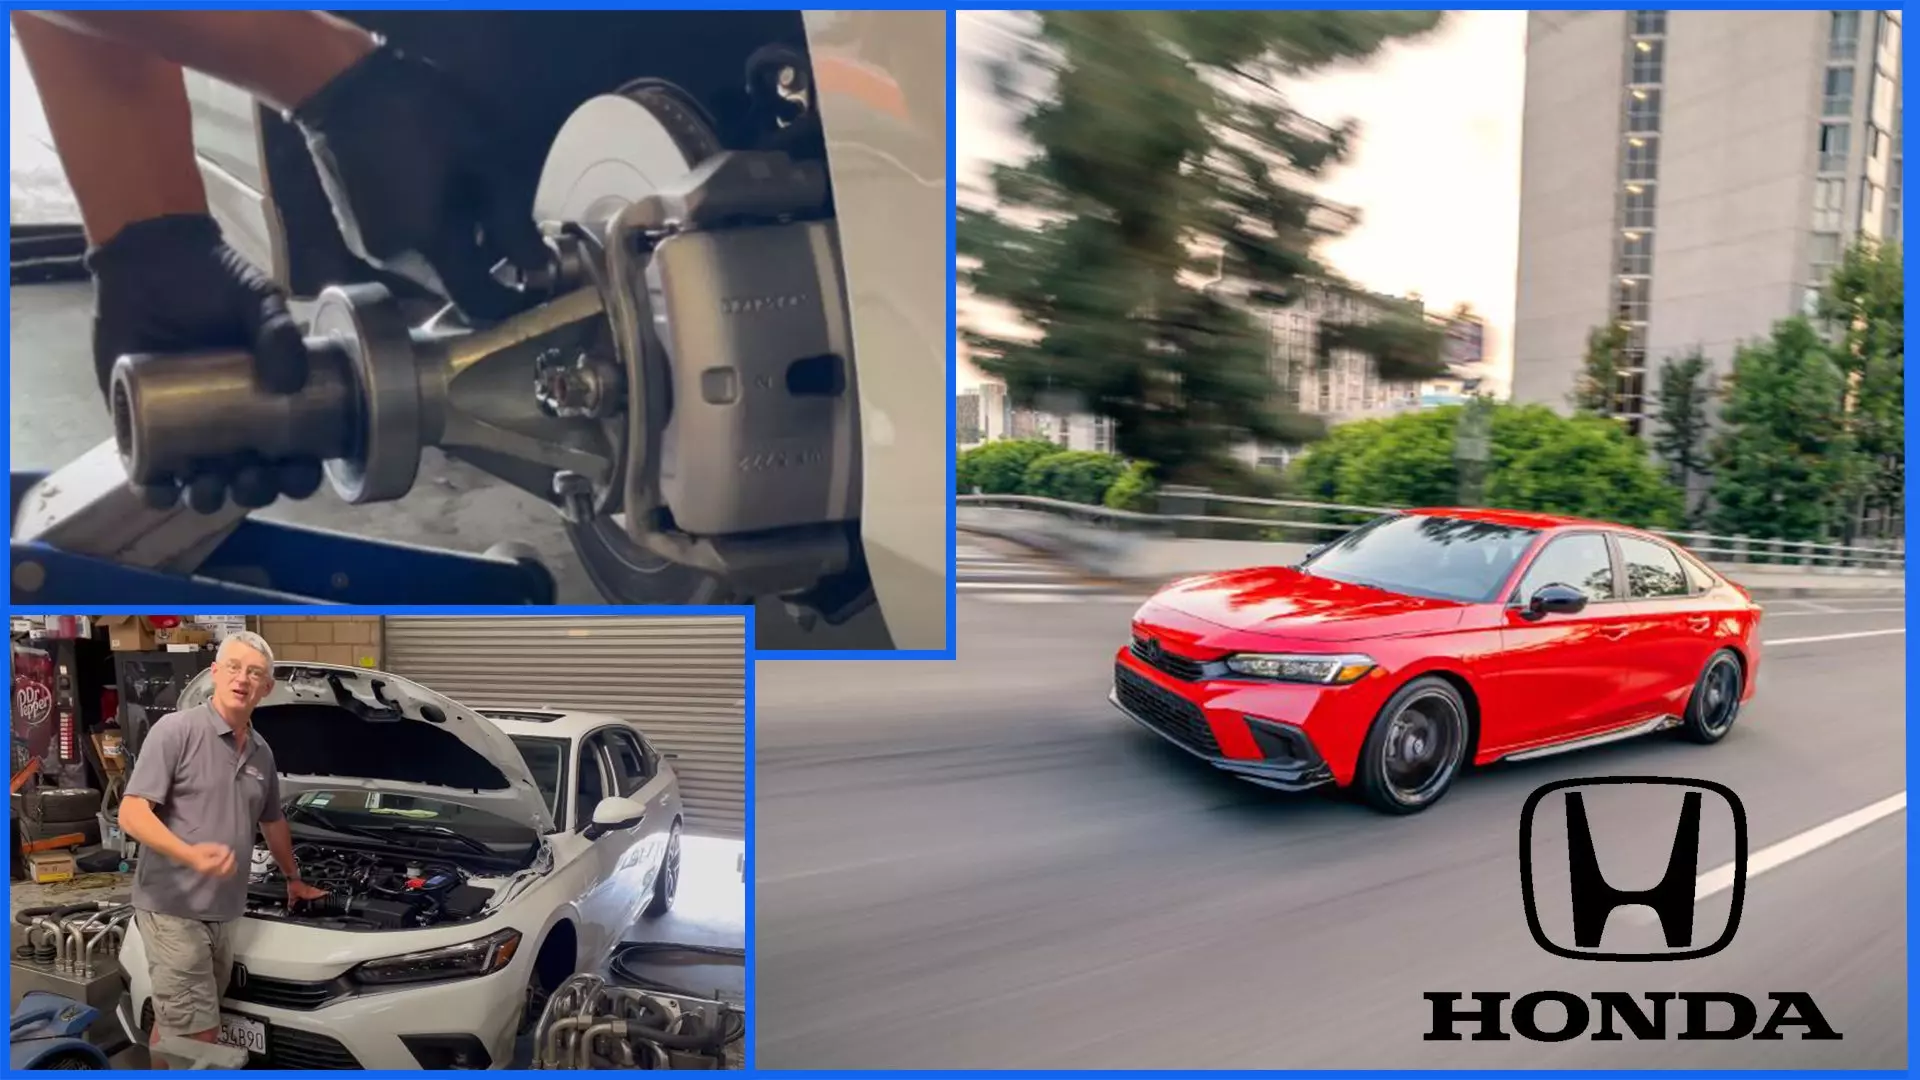 Legendary Tuner Hondata Has Already Found a Lot of Power in the New Civic | Autance